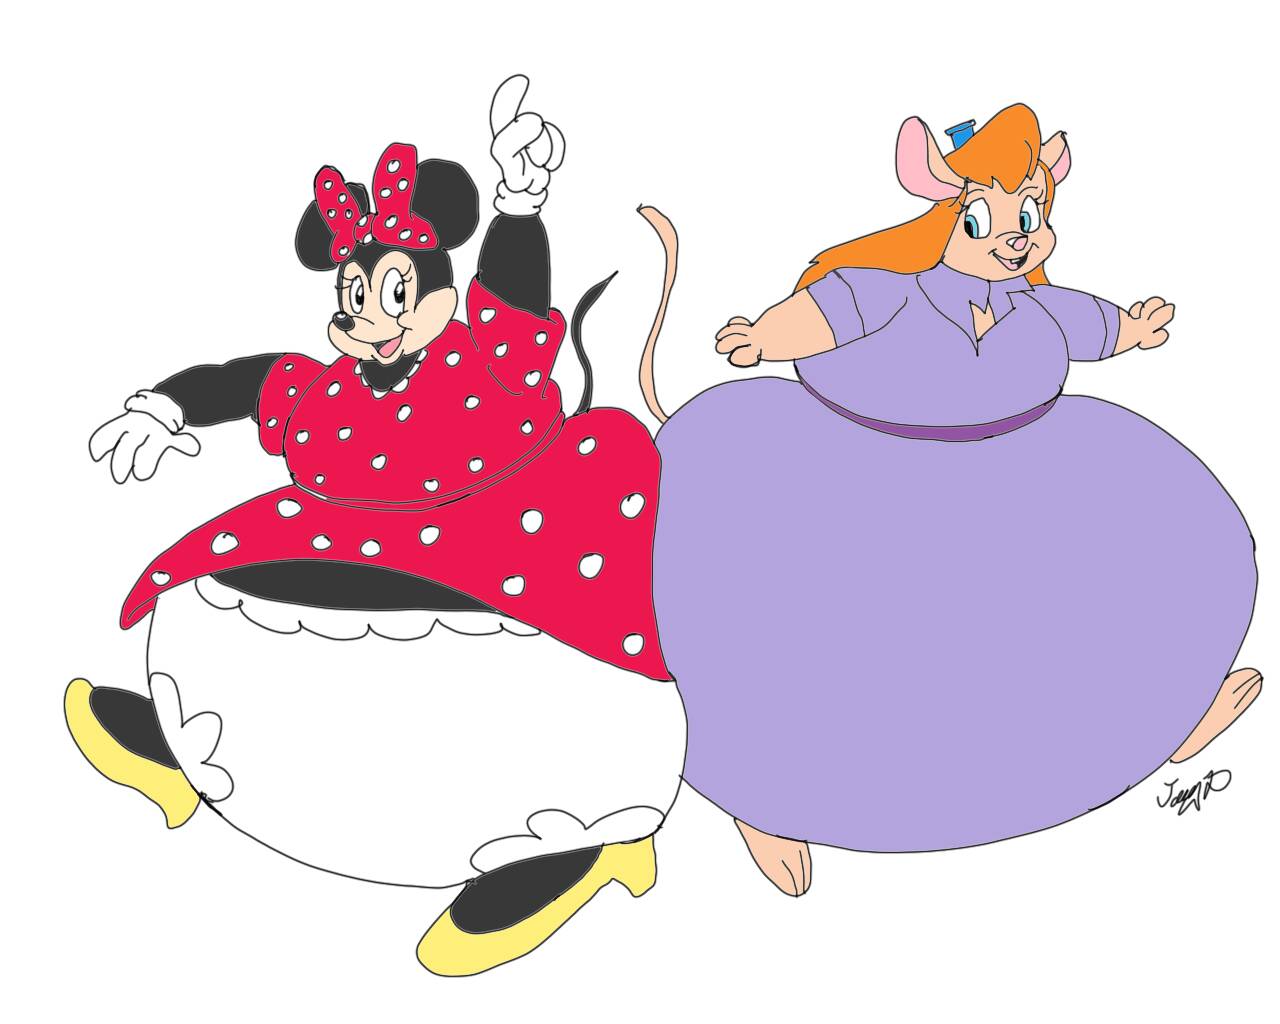 Minnie and Gadget Food Balloon Hip Bumping by Joe-Anthro -- Fur Affinity  [dot] net